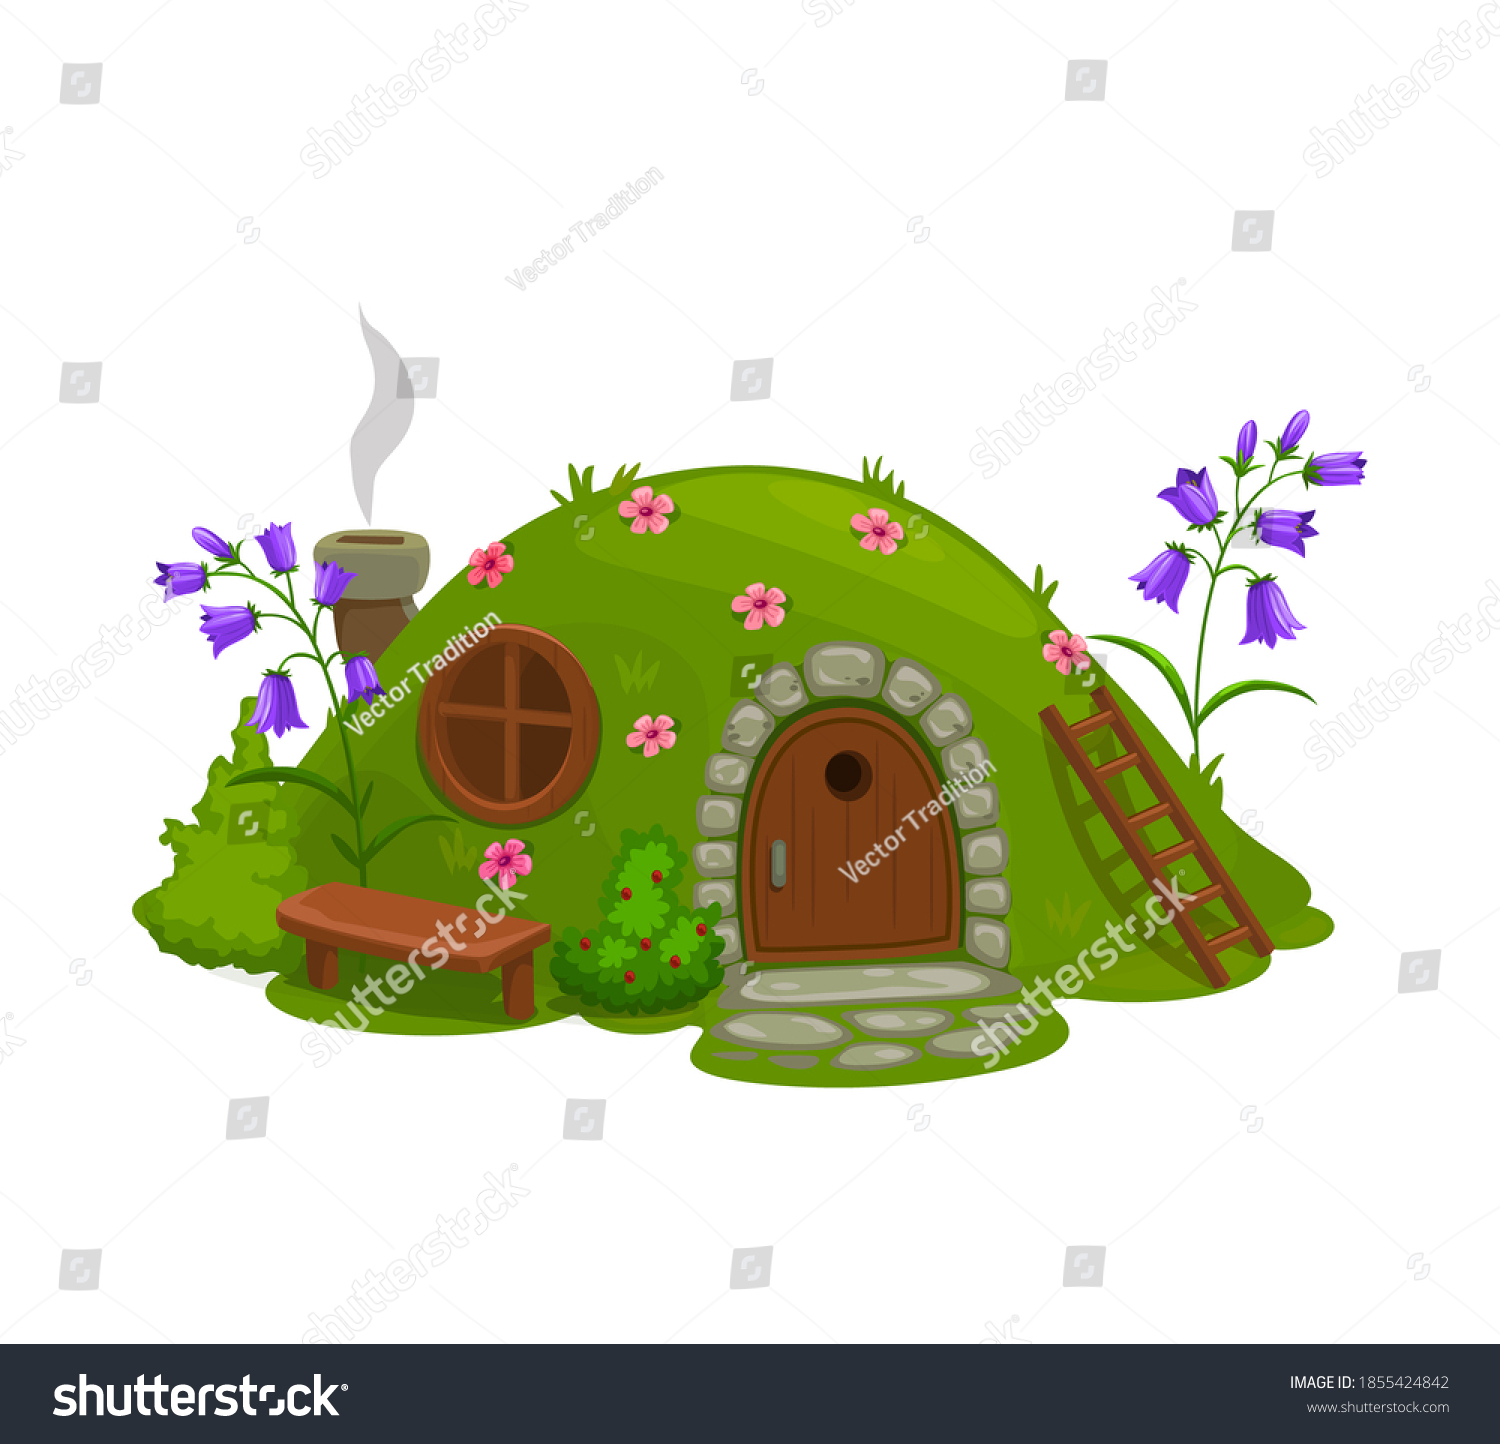 SVG of Dwarf or gnome house, fairytale dugout hut cartoon vector. Fairy or magic creature home in hill, covered grass and flowers hole, shack with wooden door, round window and bench on grass svg